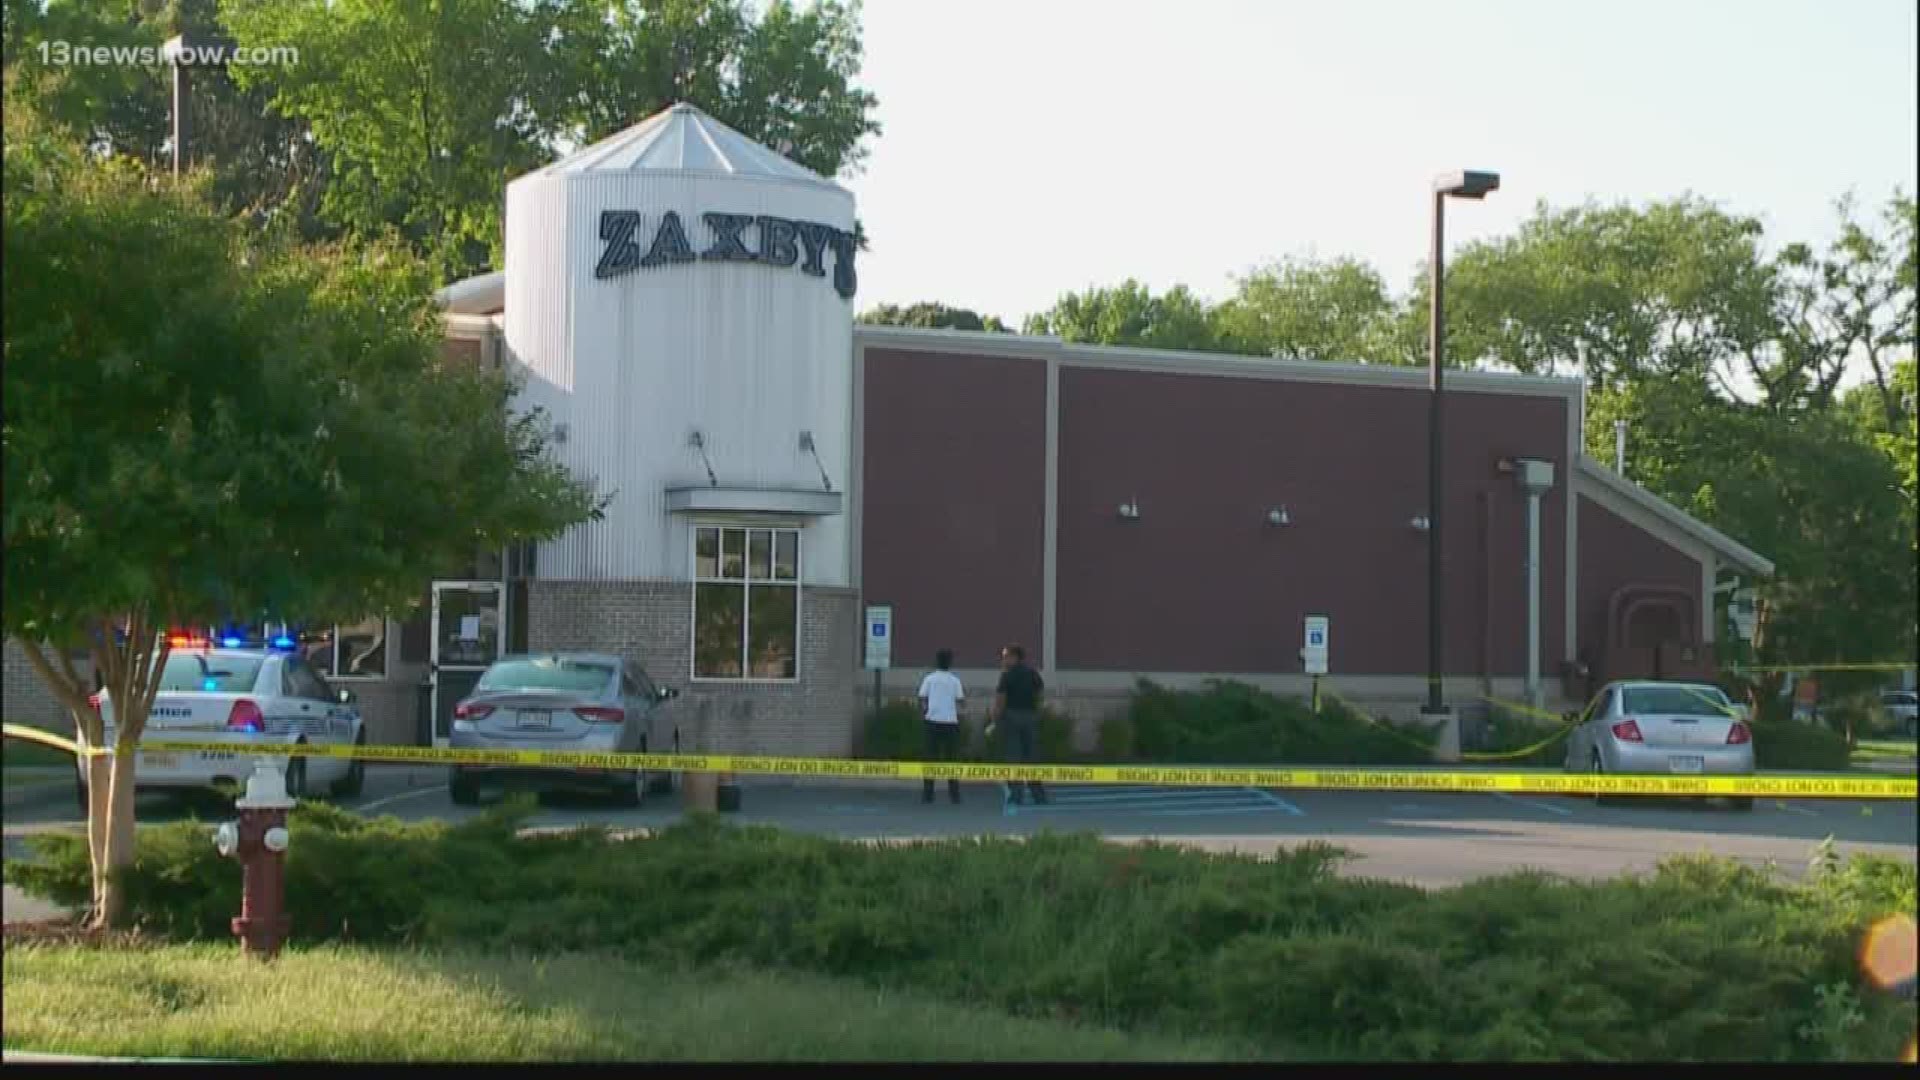 Someone shot two women in a Zaxby's parking lot this afternoon in Hampton.